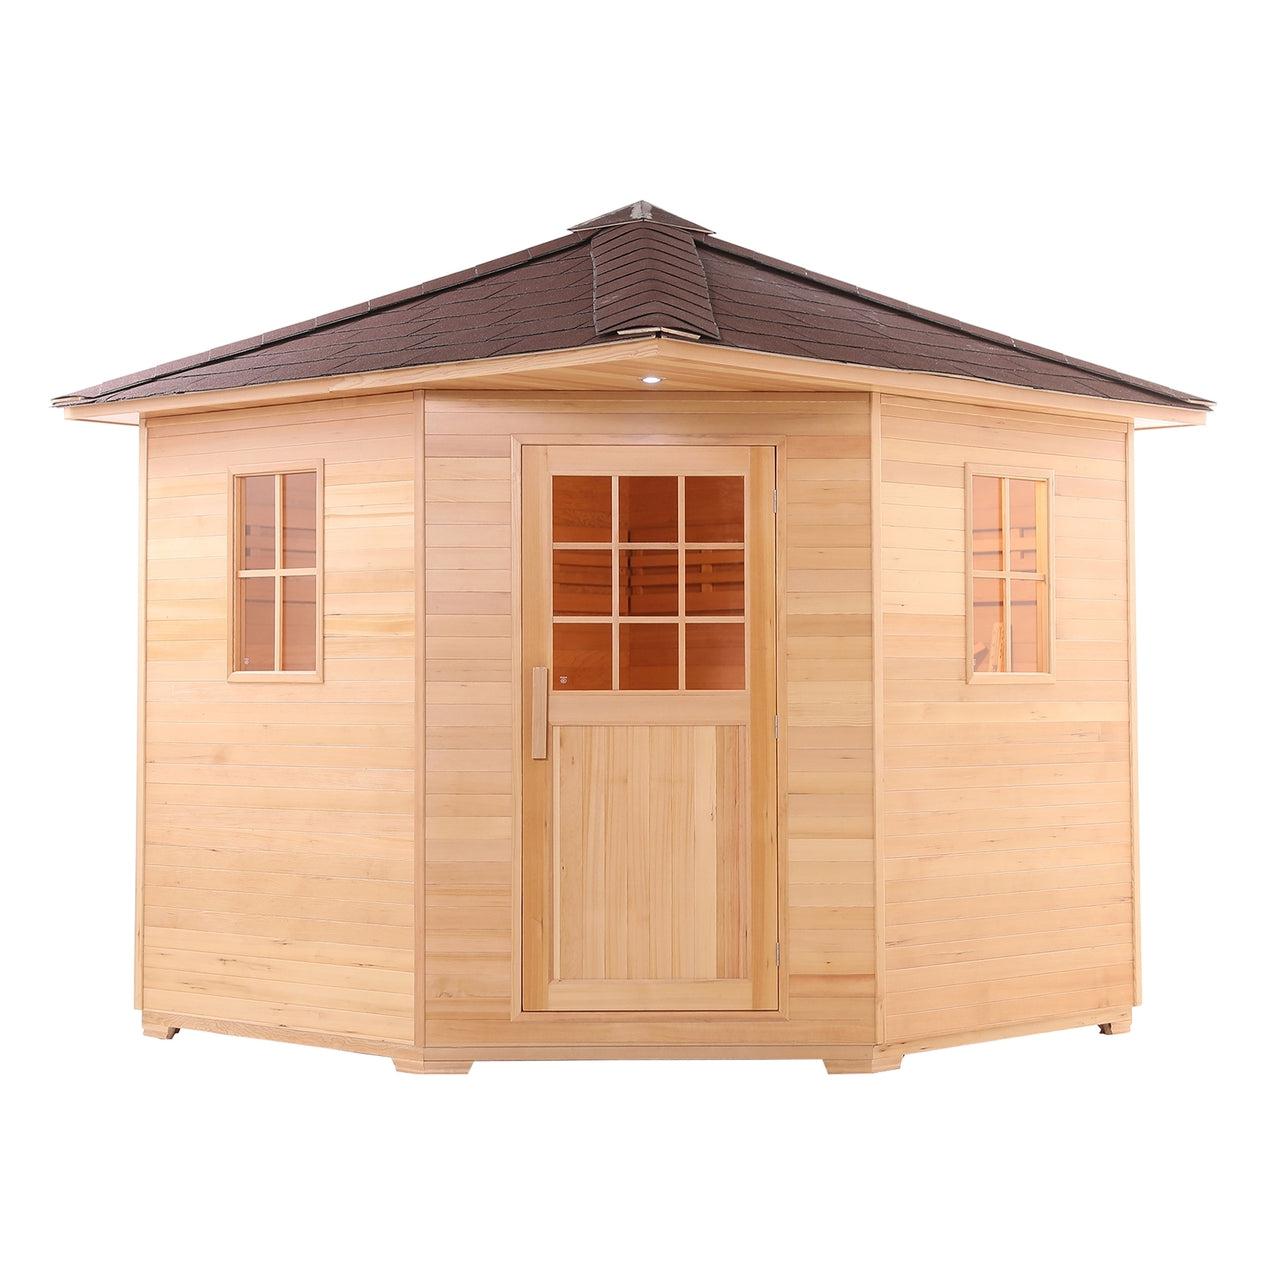 ALEKO Canadian Hemlock Wet Dry 8 Outdoor 8 Person Sauna with Asphalt Roof With Heater - SKD8HEM-AP - Purely Relaxation